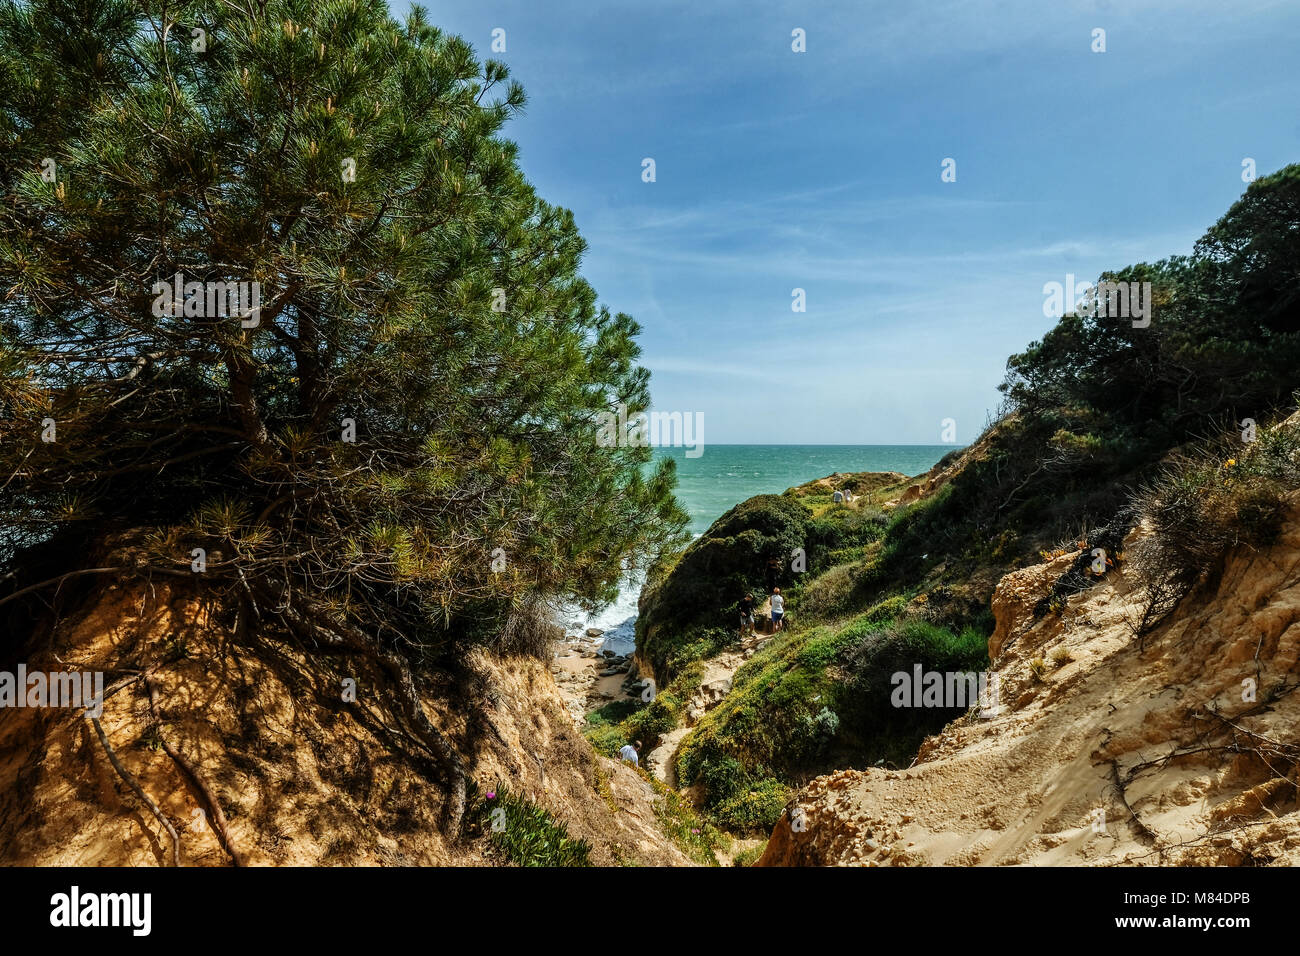 View of Landscape with Cliff and Dunes at the Beach near Albufeira Portugal in Summer with local vegetation flowers and plants Stock Photo